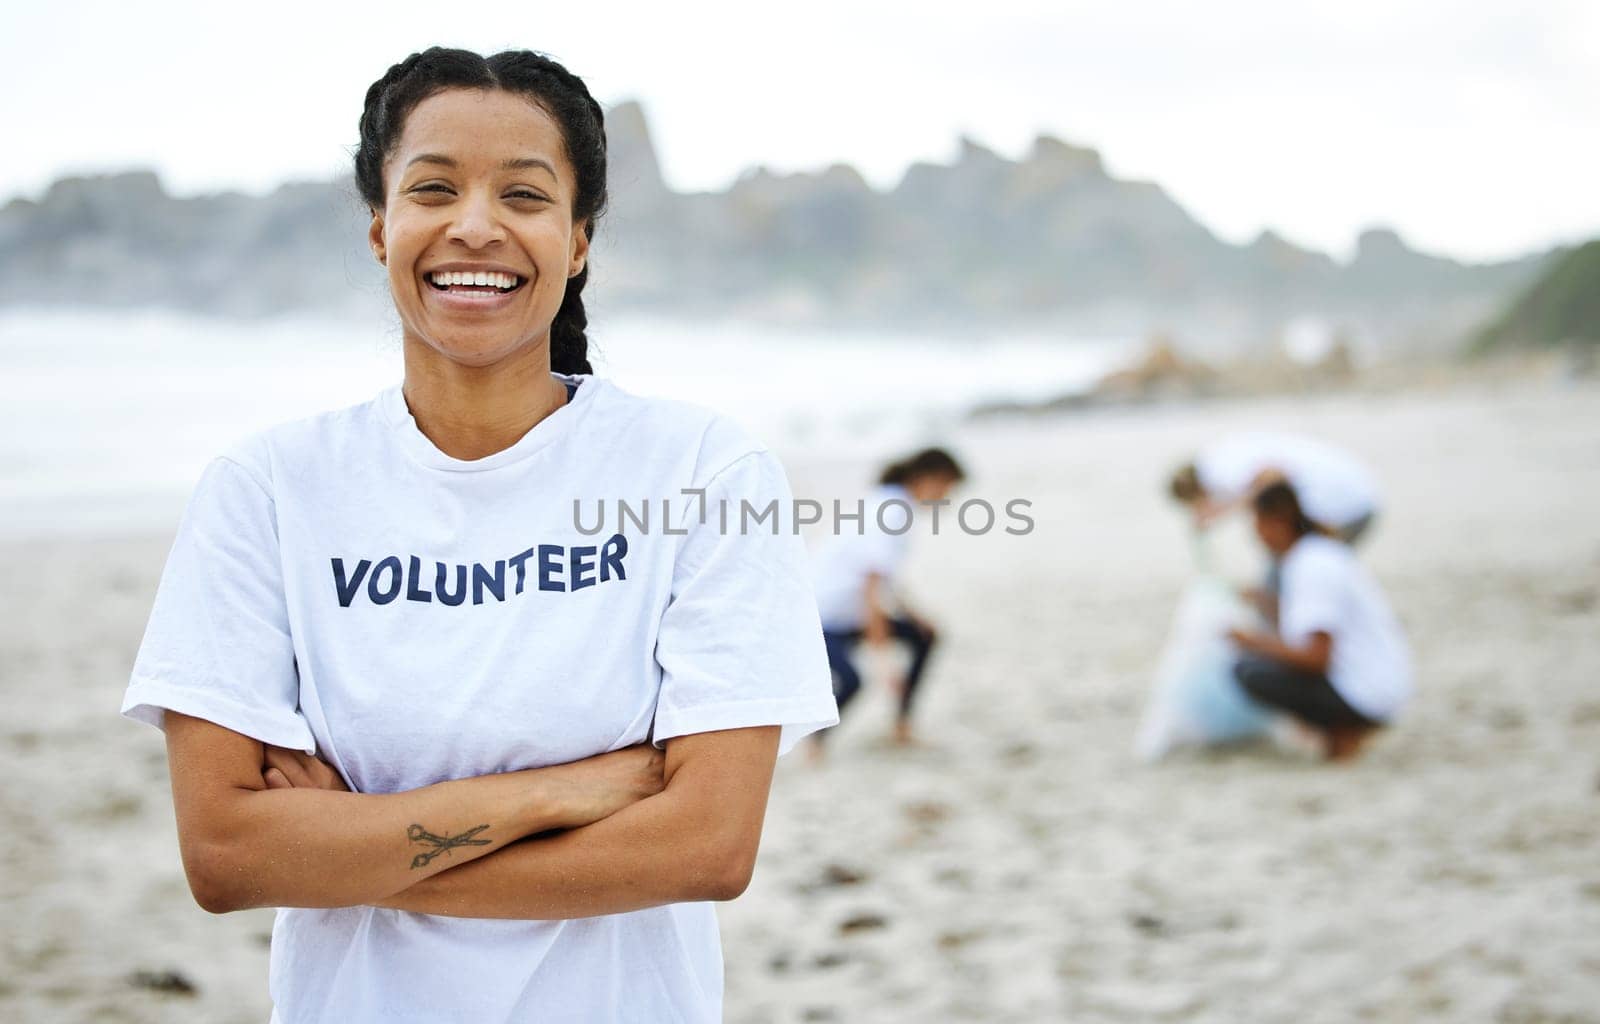 Portrait, smile and volunteer woman at beach for cleaning, recycling and sustainability. Earth day, laughing and proud female with arms crossed for community service, charity and climate change